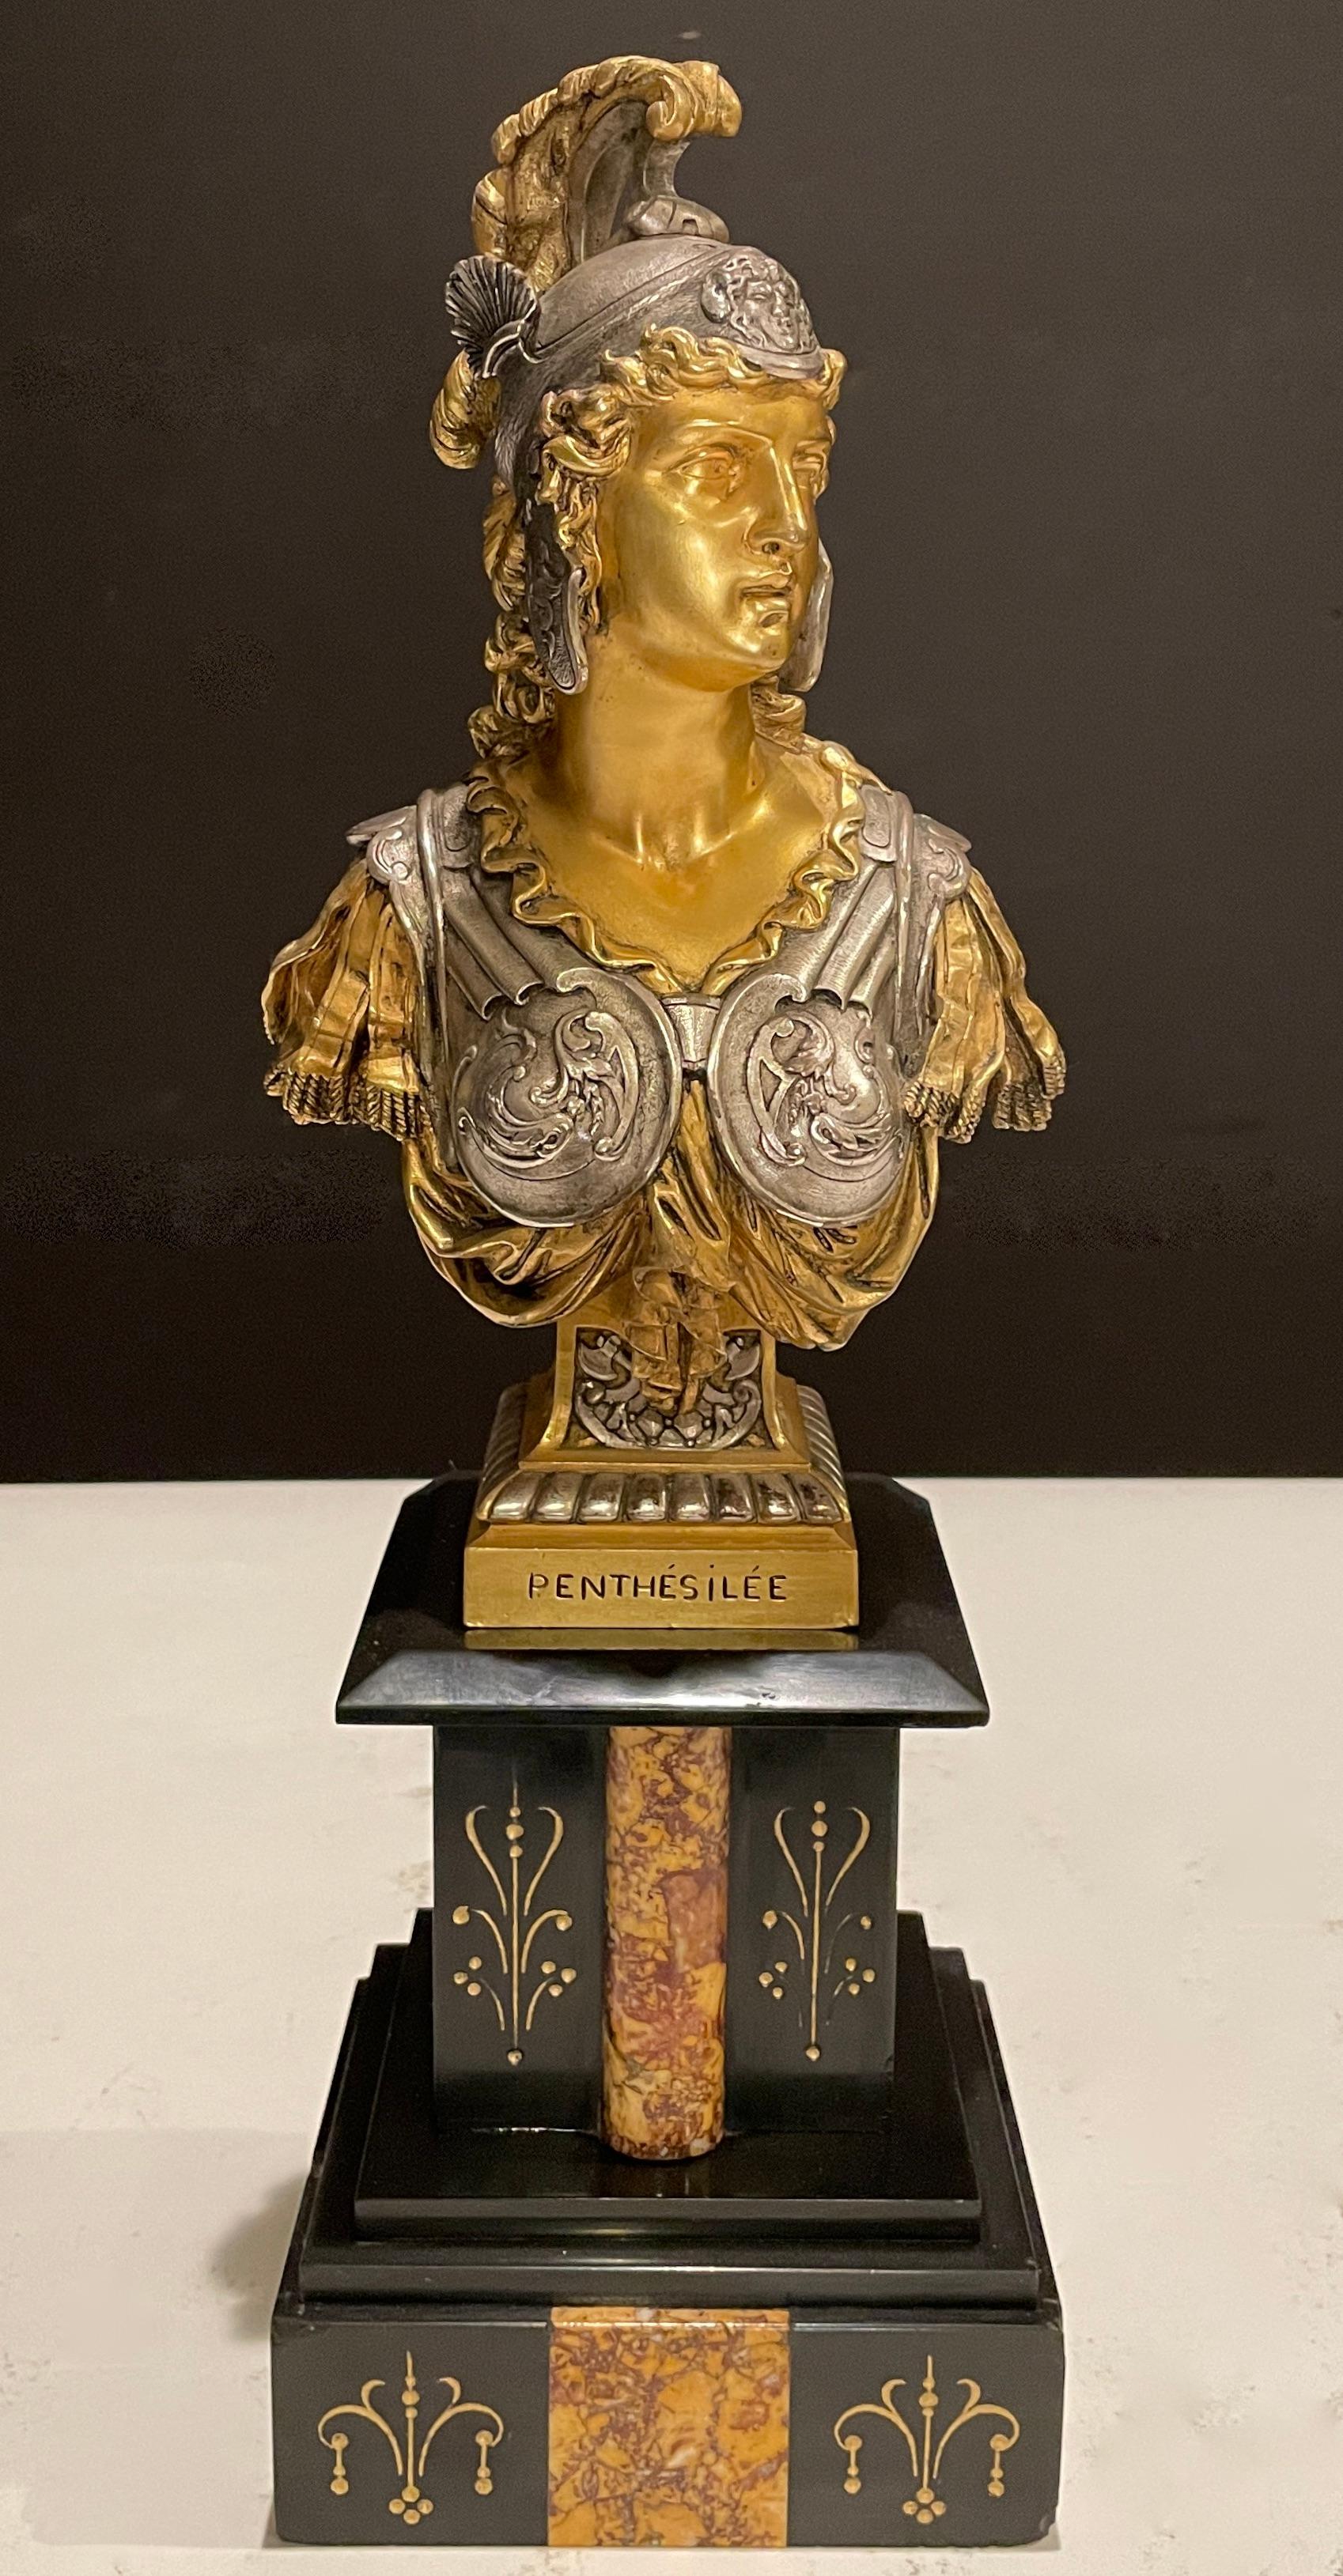 Fine quality gilt and silvered bronze bust of Amazonian Queen Penthesilea by Emile Hebert. Original 19th century bronze bust mounted on a period Belgian black marble base with gilt details and Brèche d' Alep marble. 

Pierre-Eugène-Émile Hébert